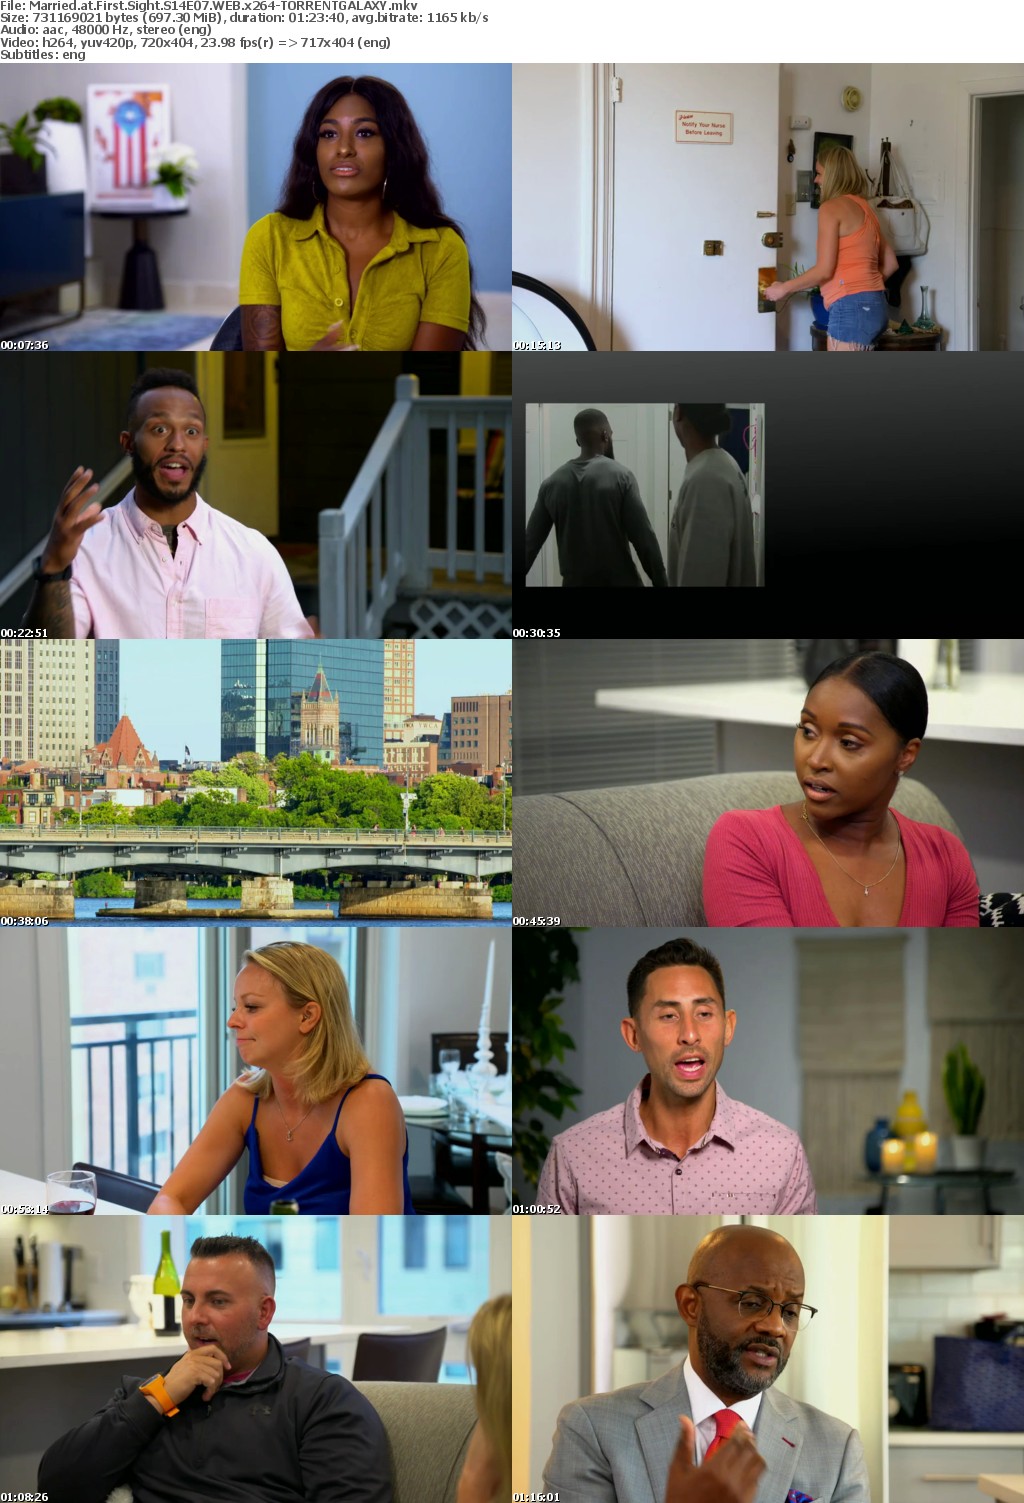 Married at First Sight S14E07 WEB x264-GALAXY